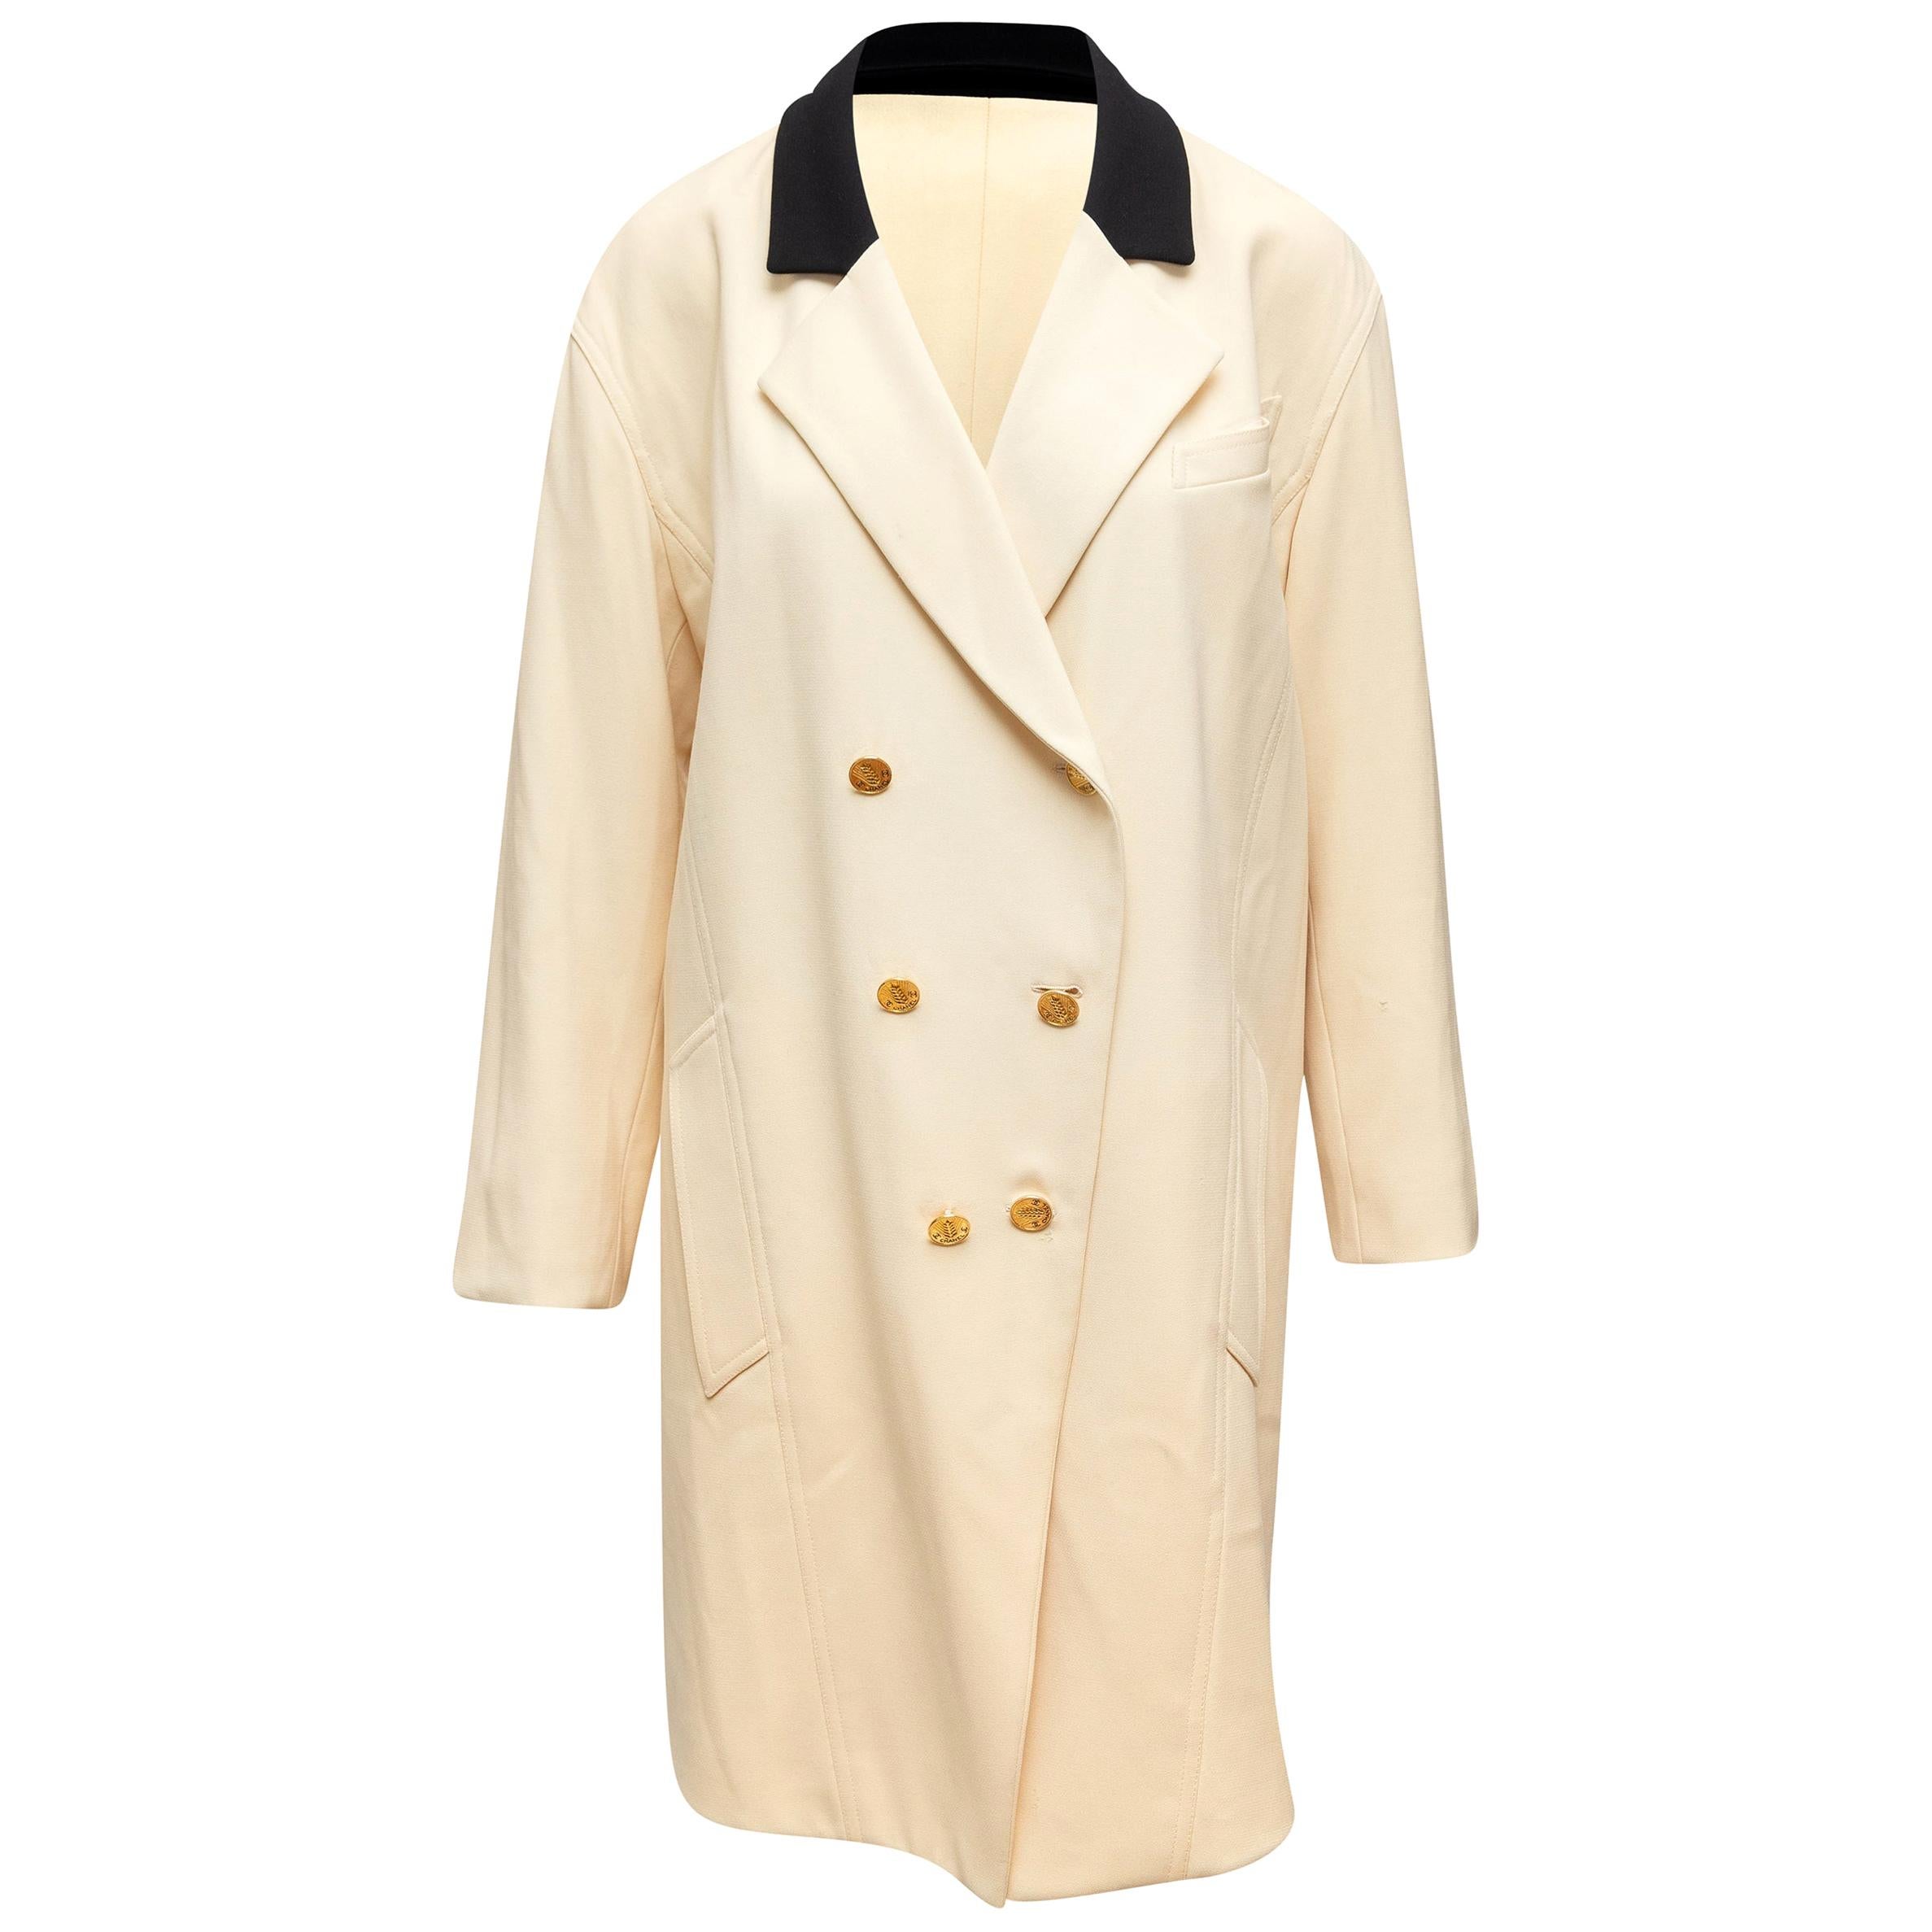 Chanel Boutique Cream Long Double-Breasted Coat